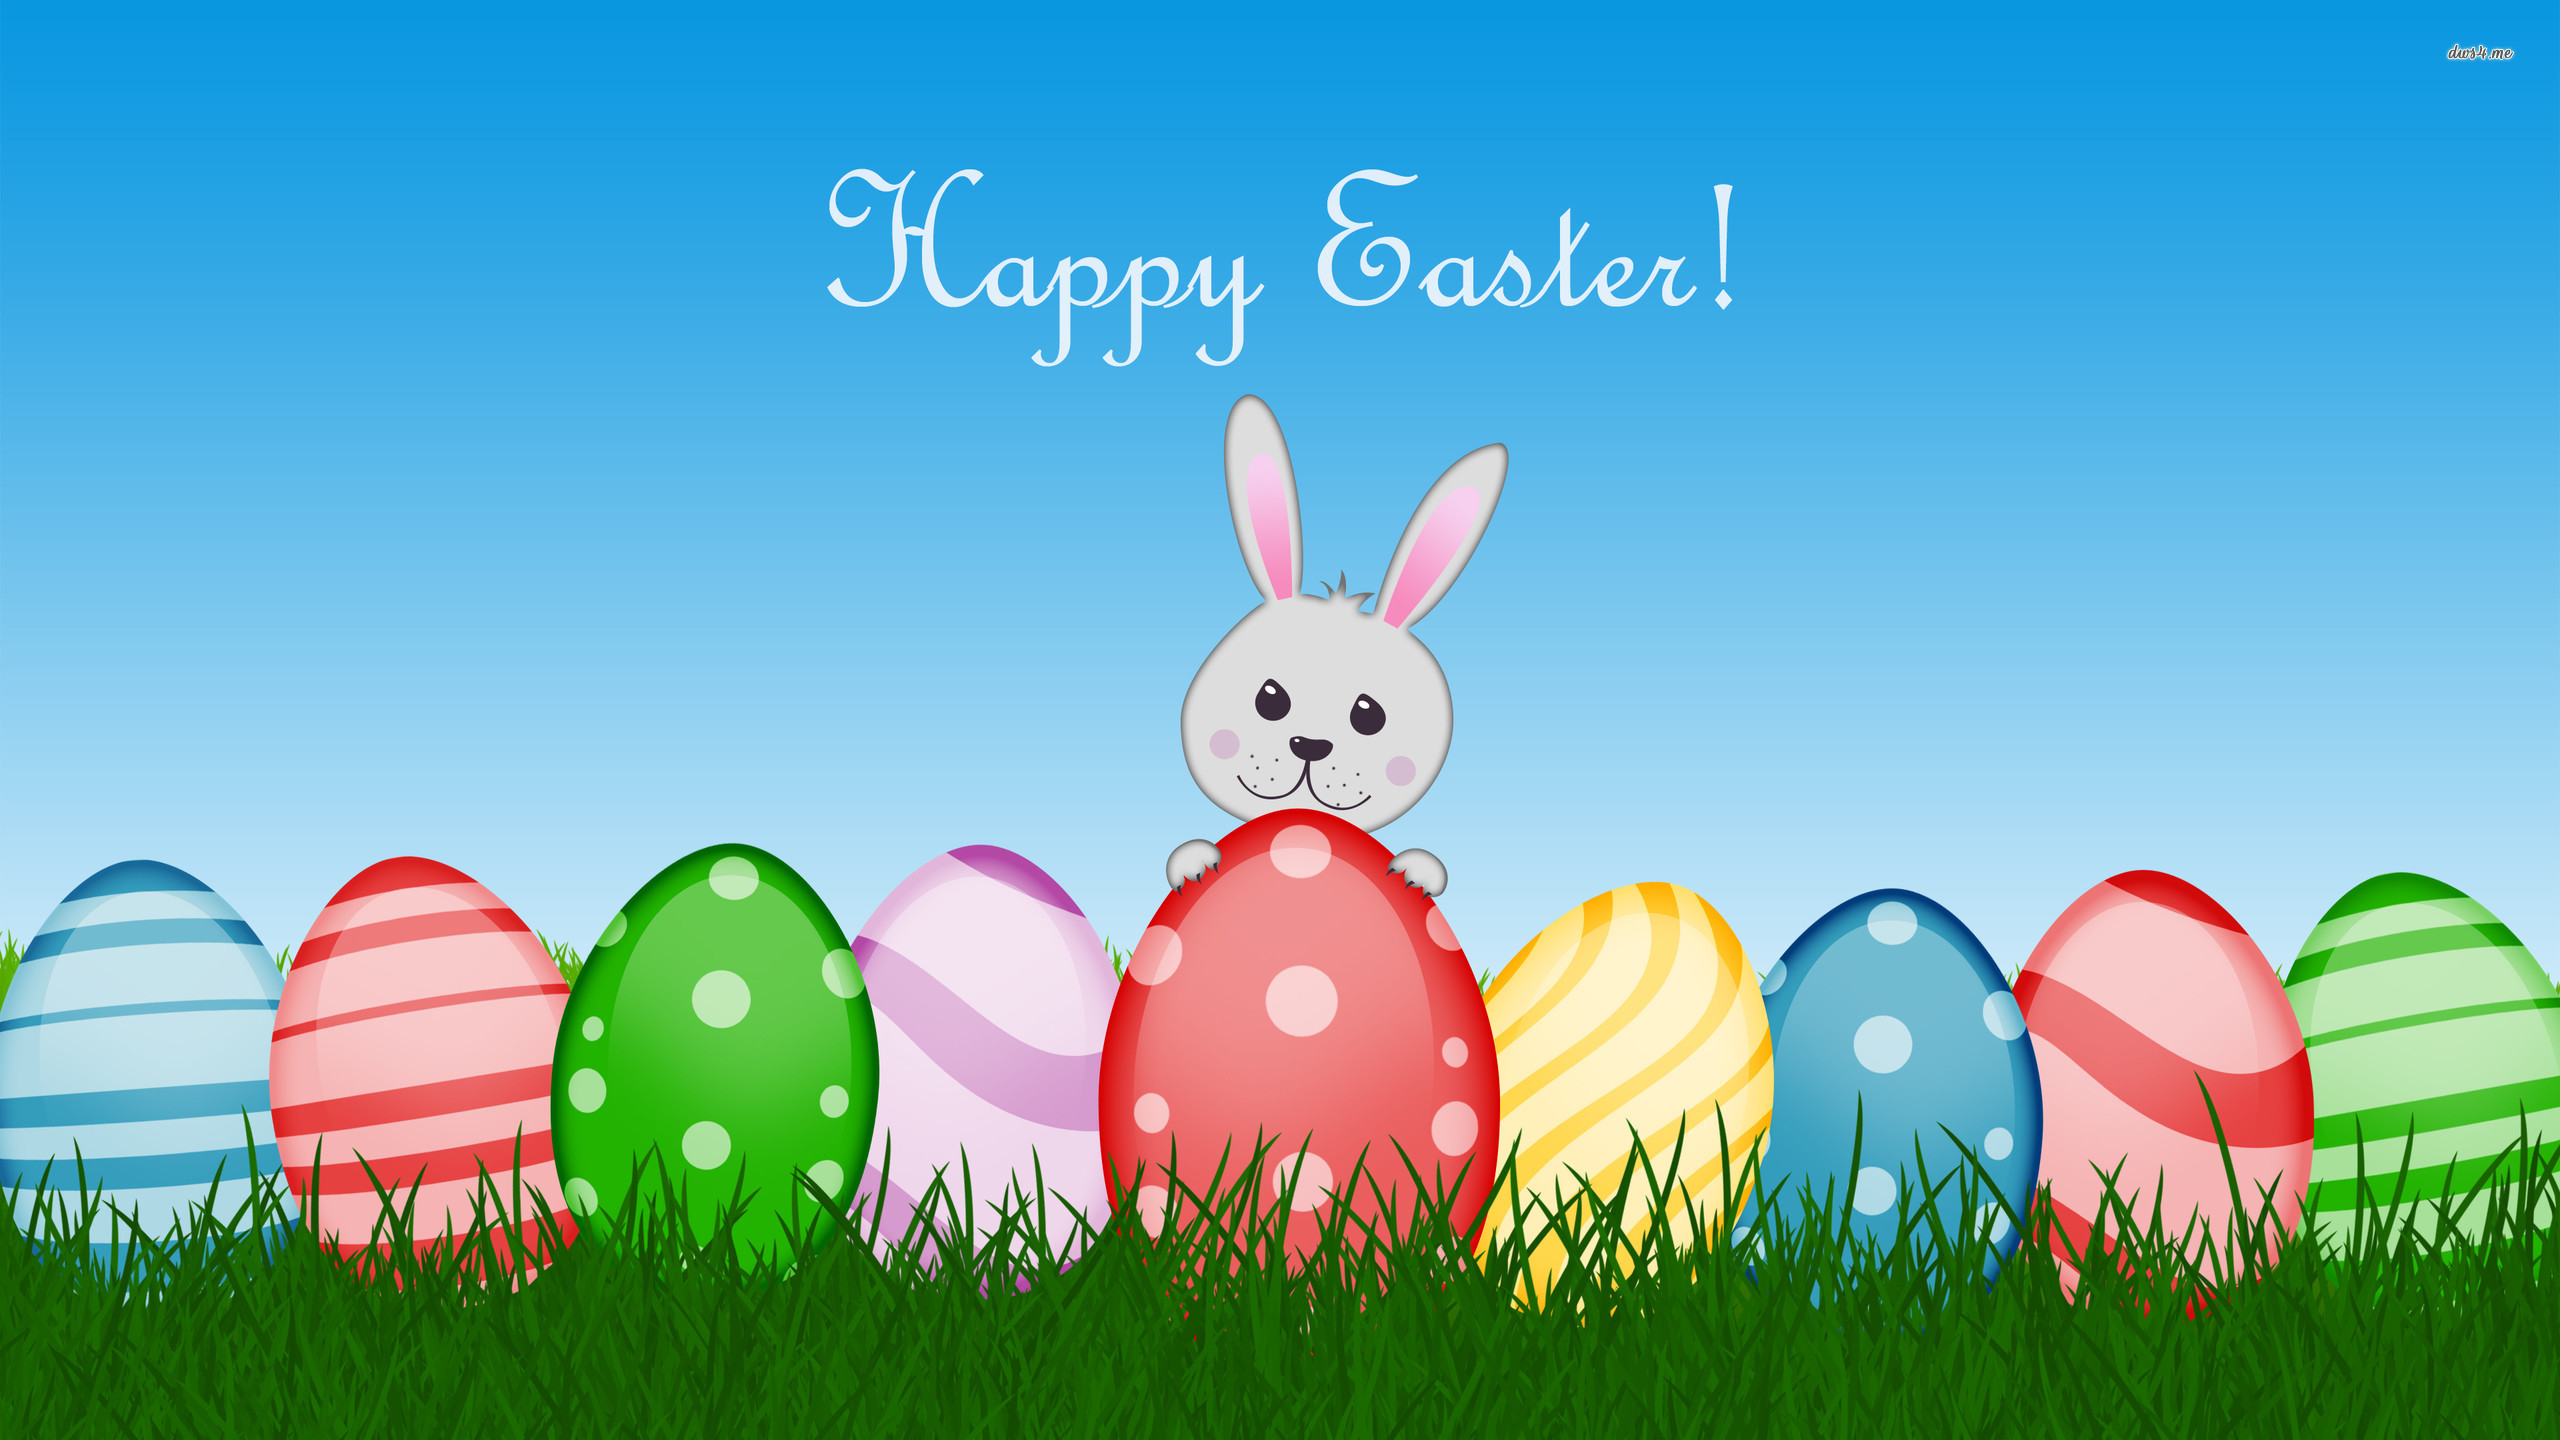 20+ Easter wallpapers HD | Download Free backgrounds